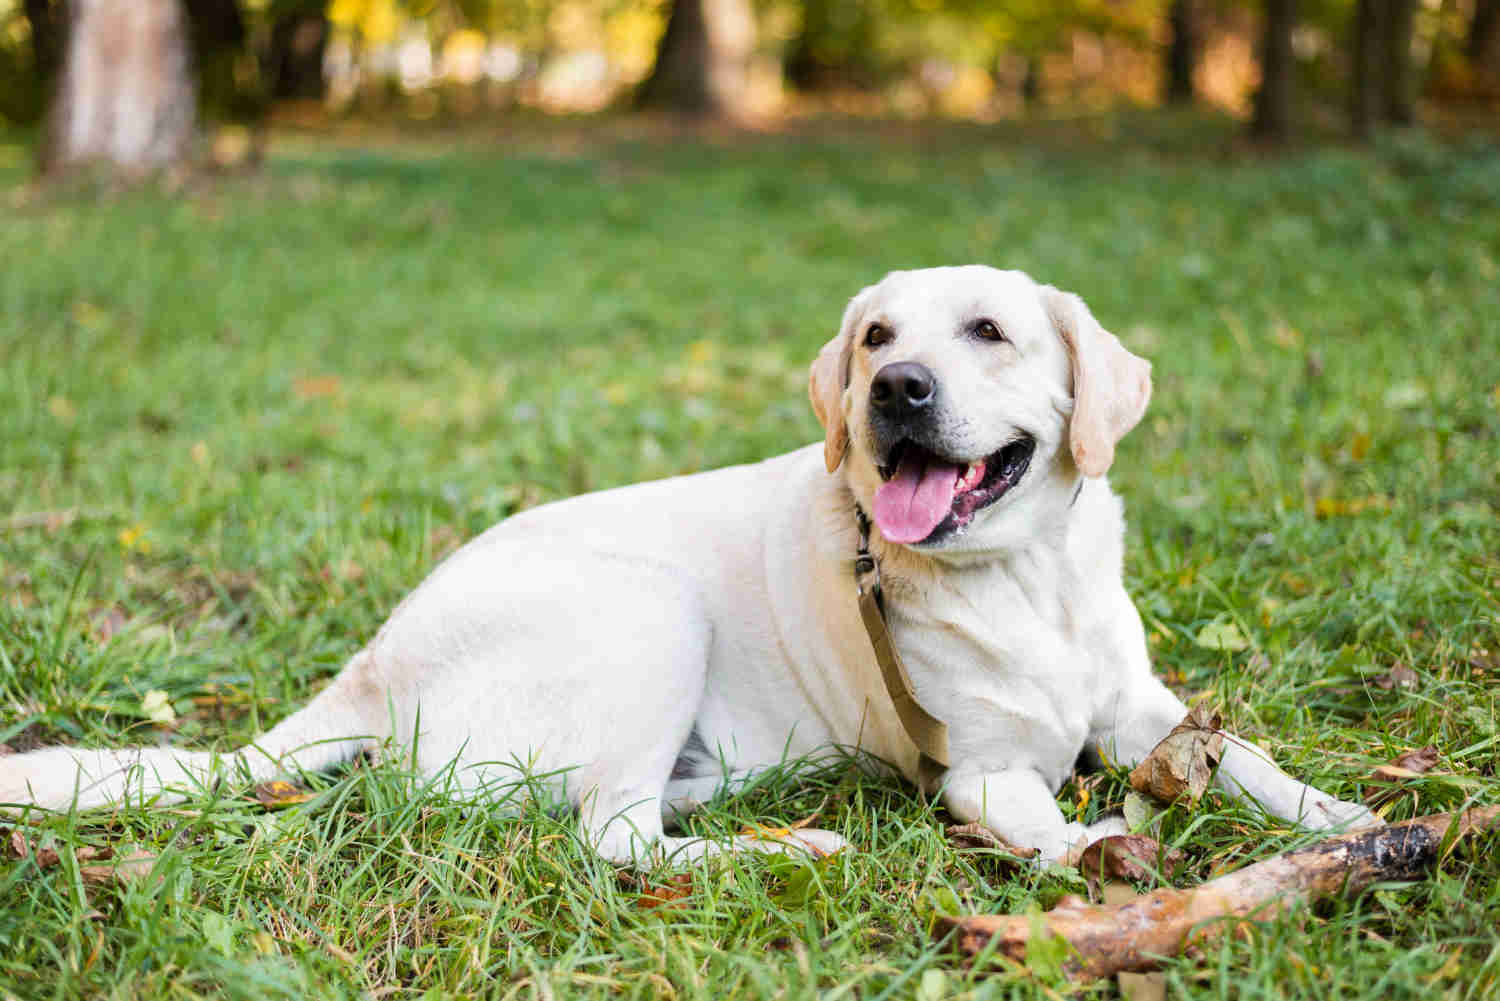 Labrador Retriever Grooming 101: A Guide to Safely Cleaning Your Dog's Anal Glands